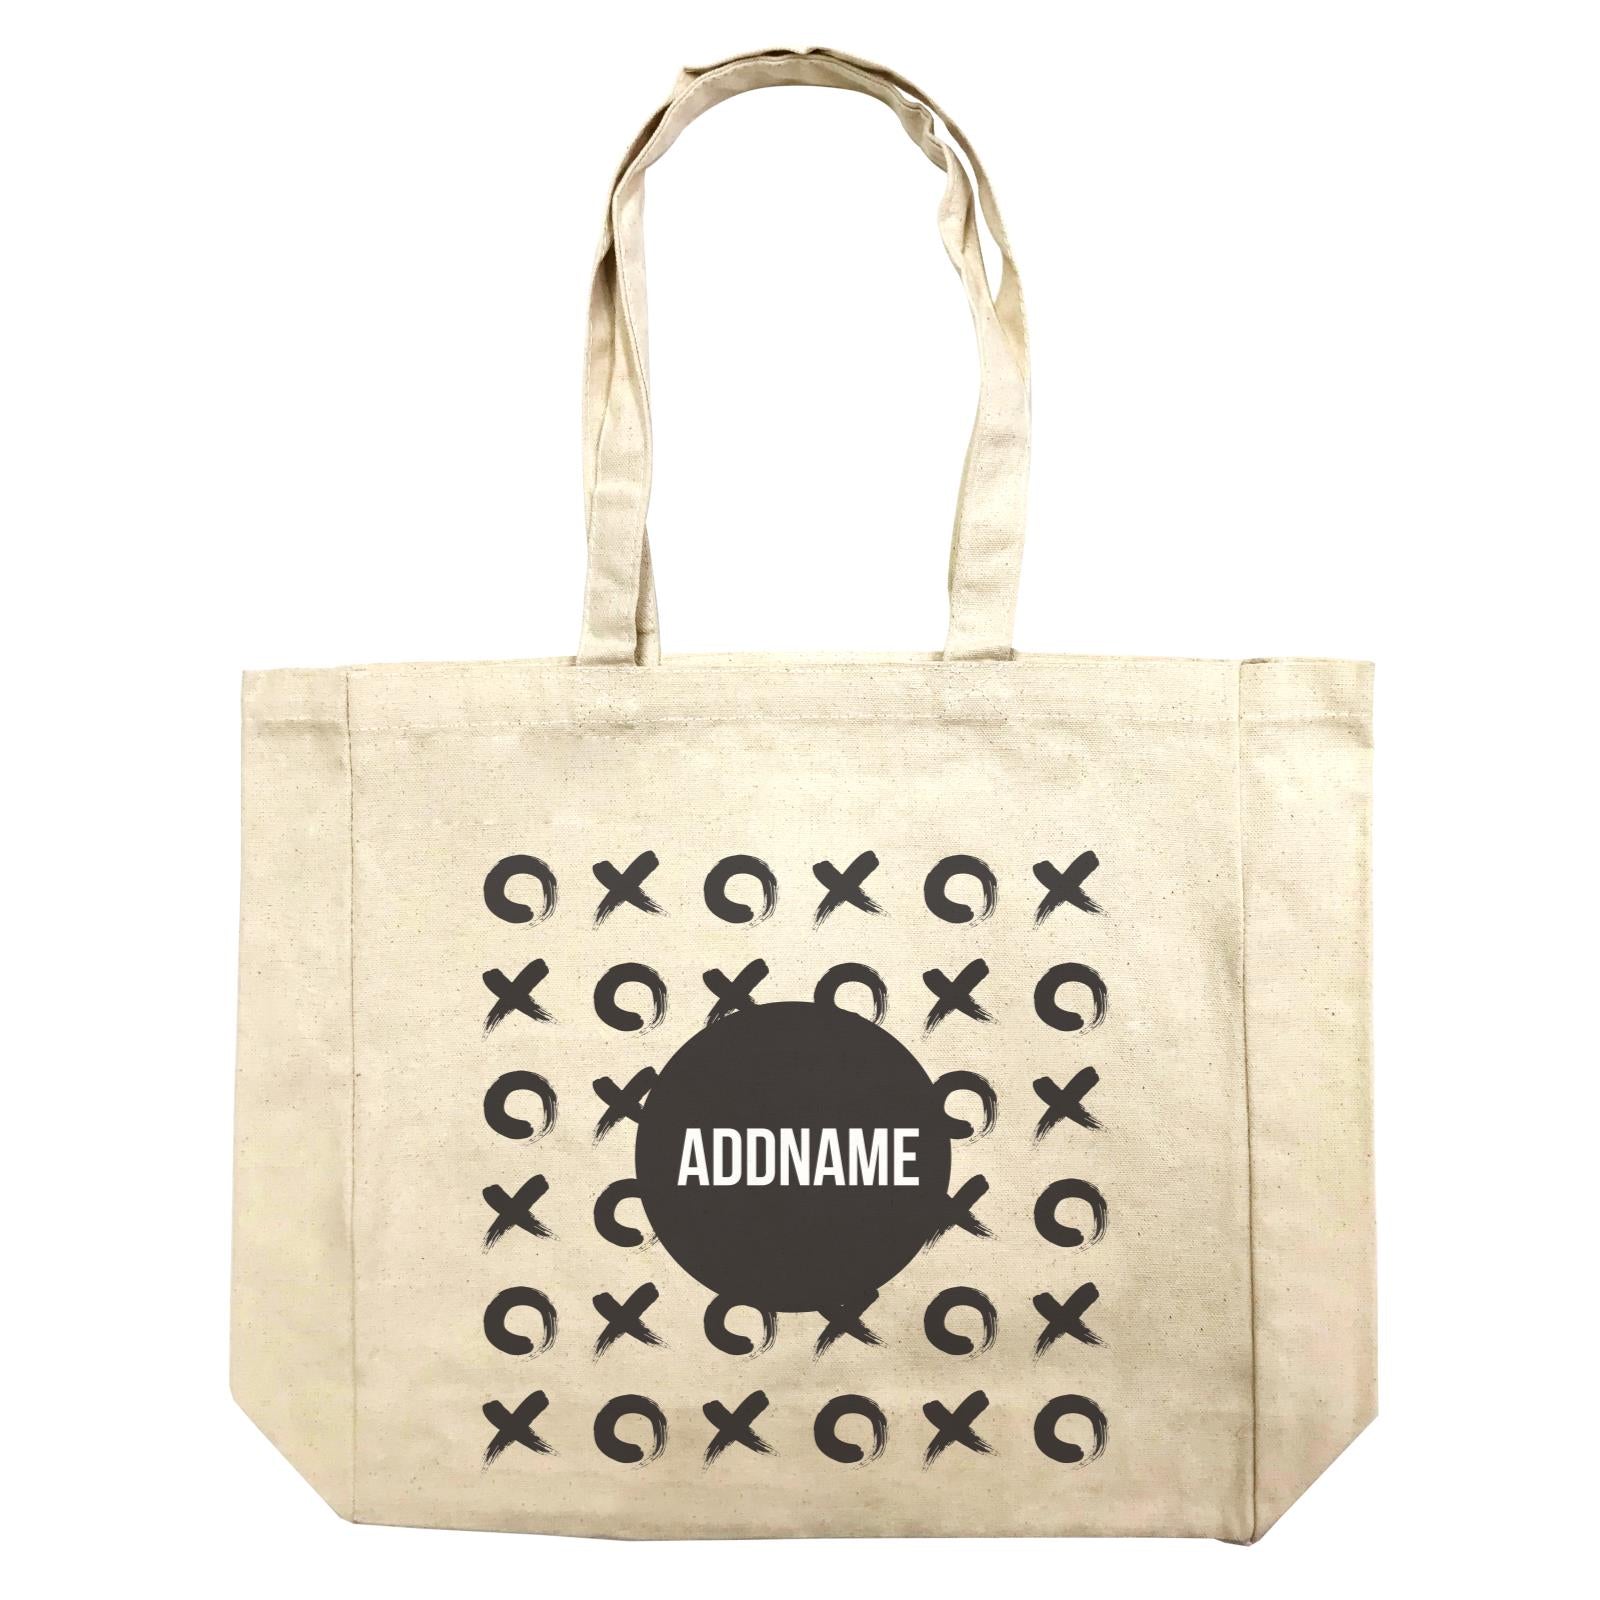 Monochrome Black Tic Tac Toe with Addname Shopping Bag